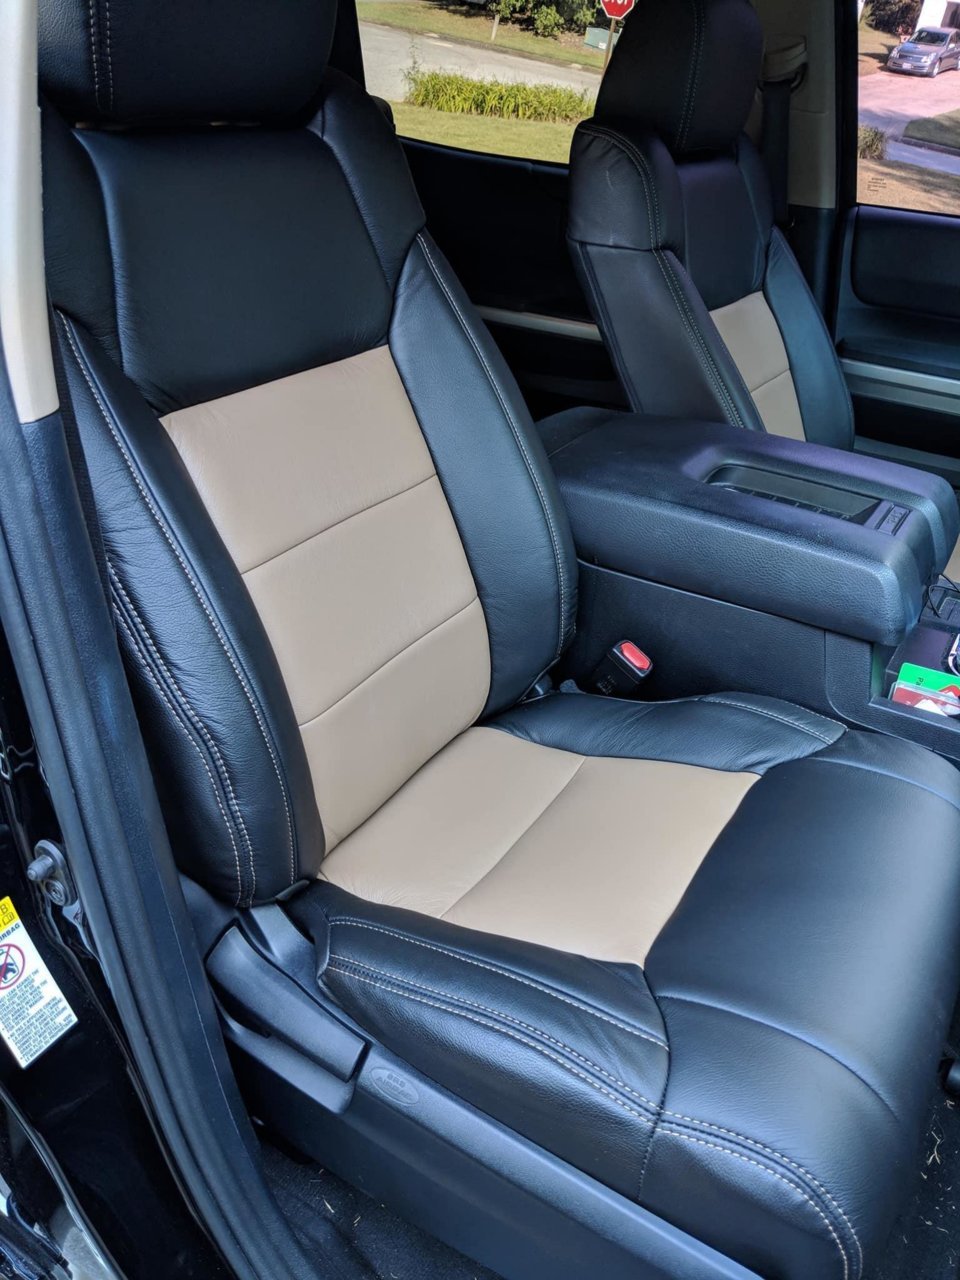 "LEATHER" SEAT COVERS | Toyota Tundra Forum